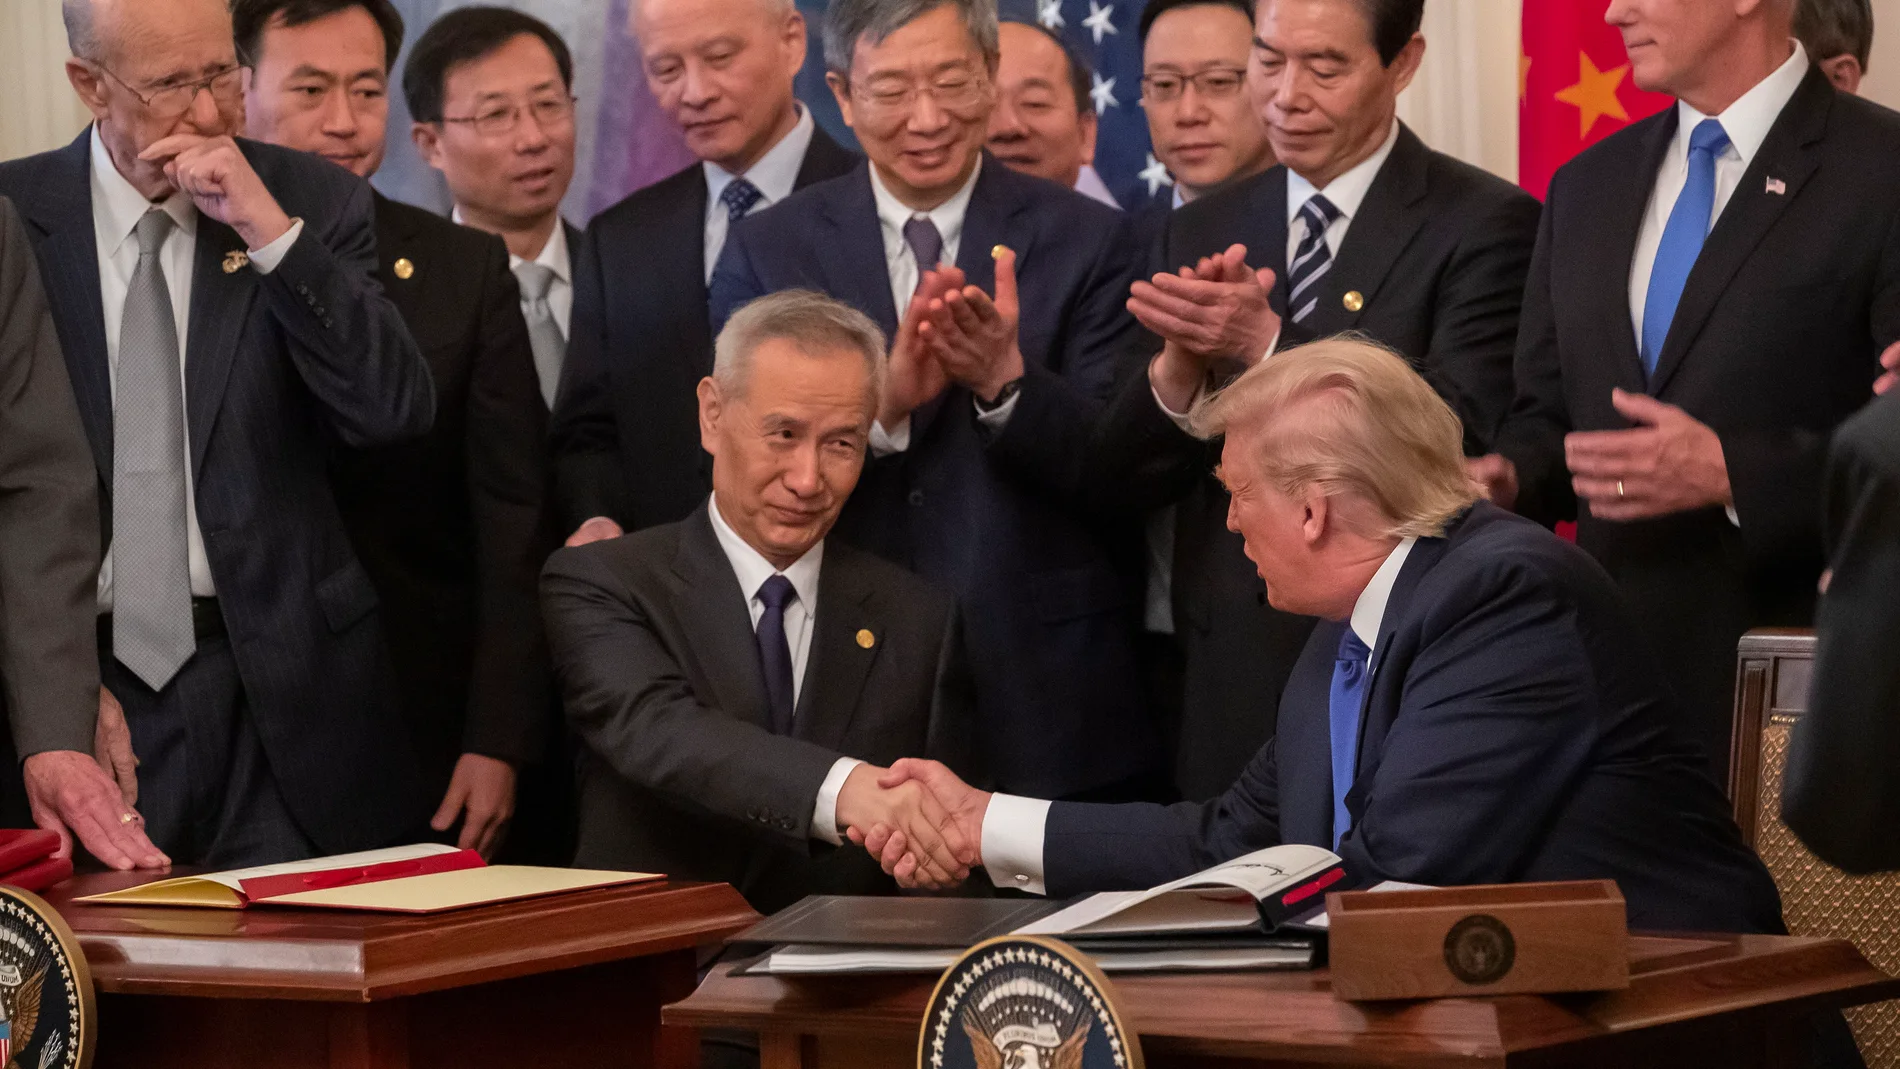 US President Donald J. Trump signs a trade agreement with Chinese Vice Premier Liu He at the White House